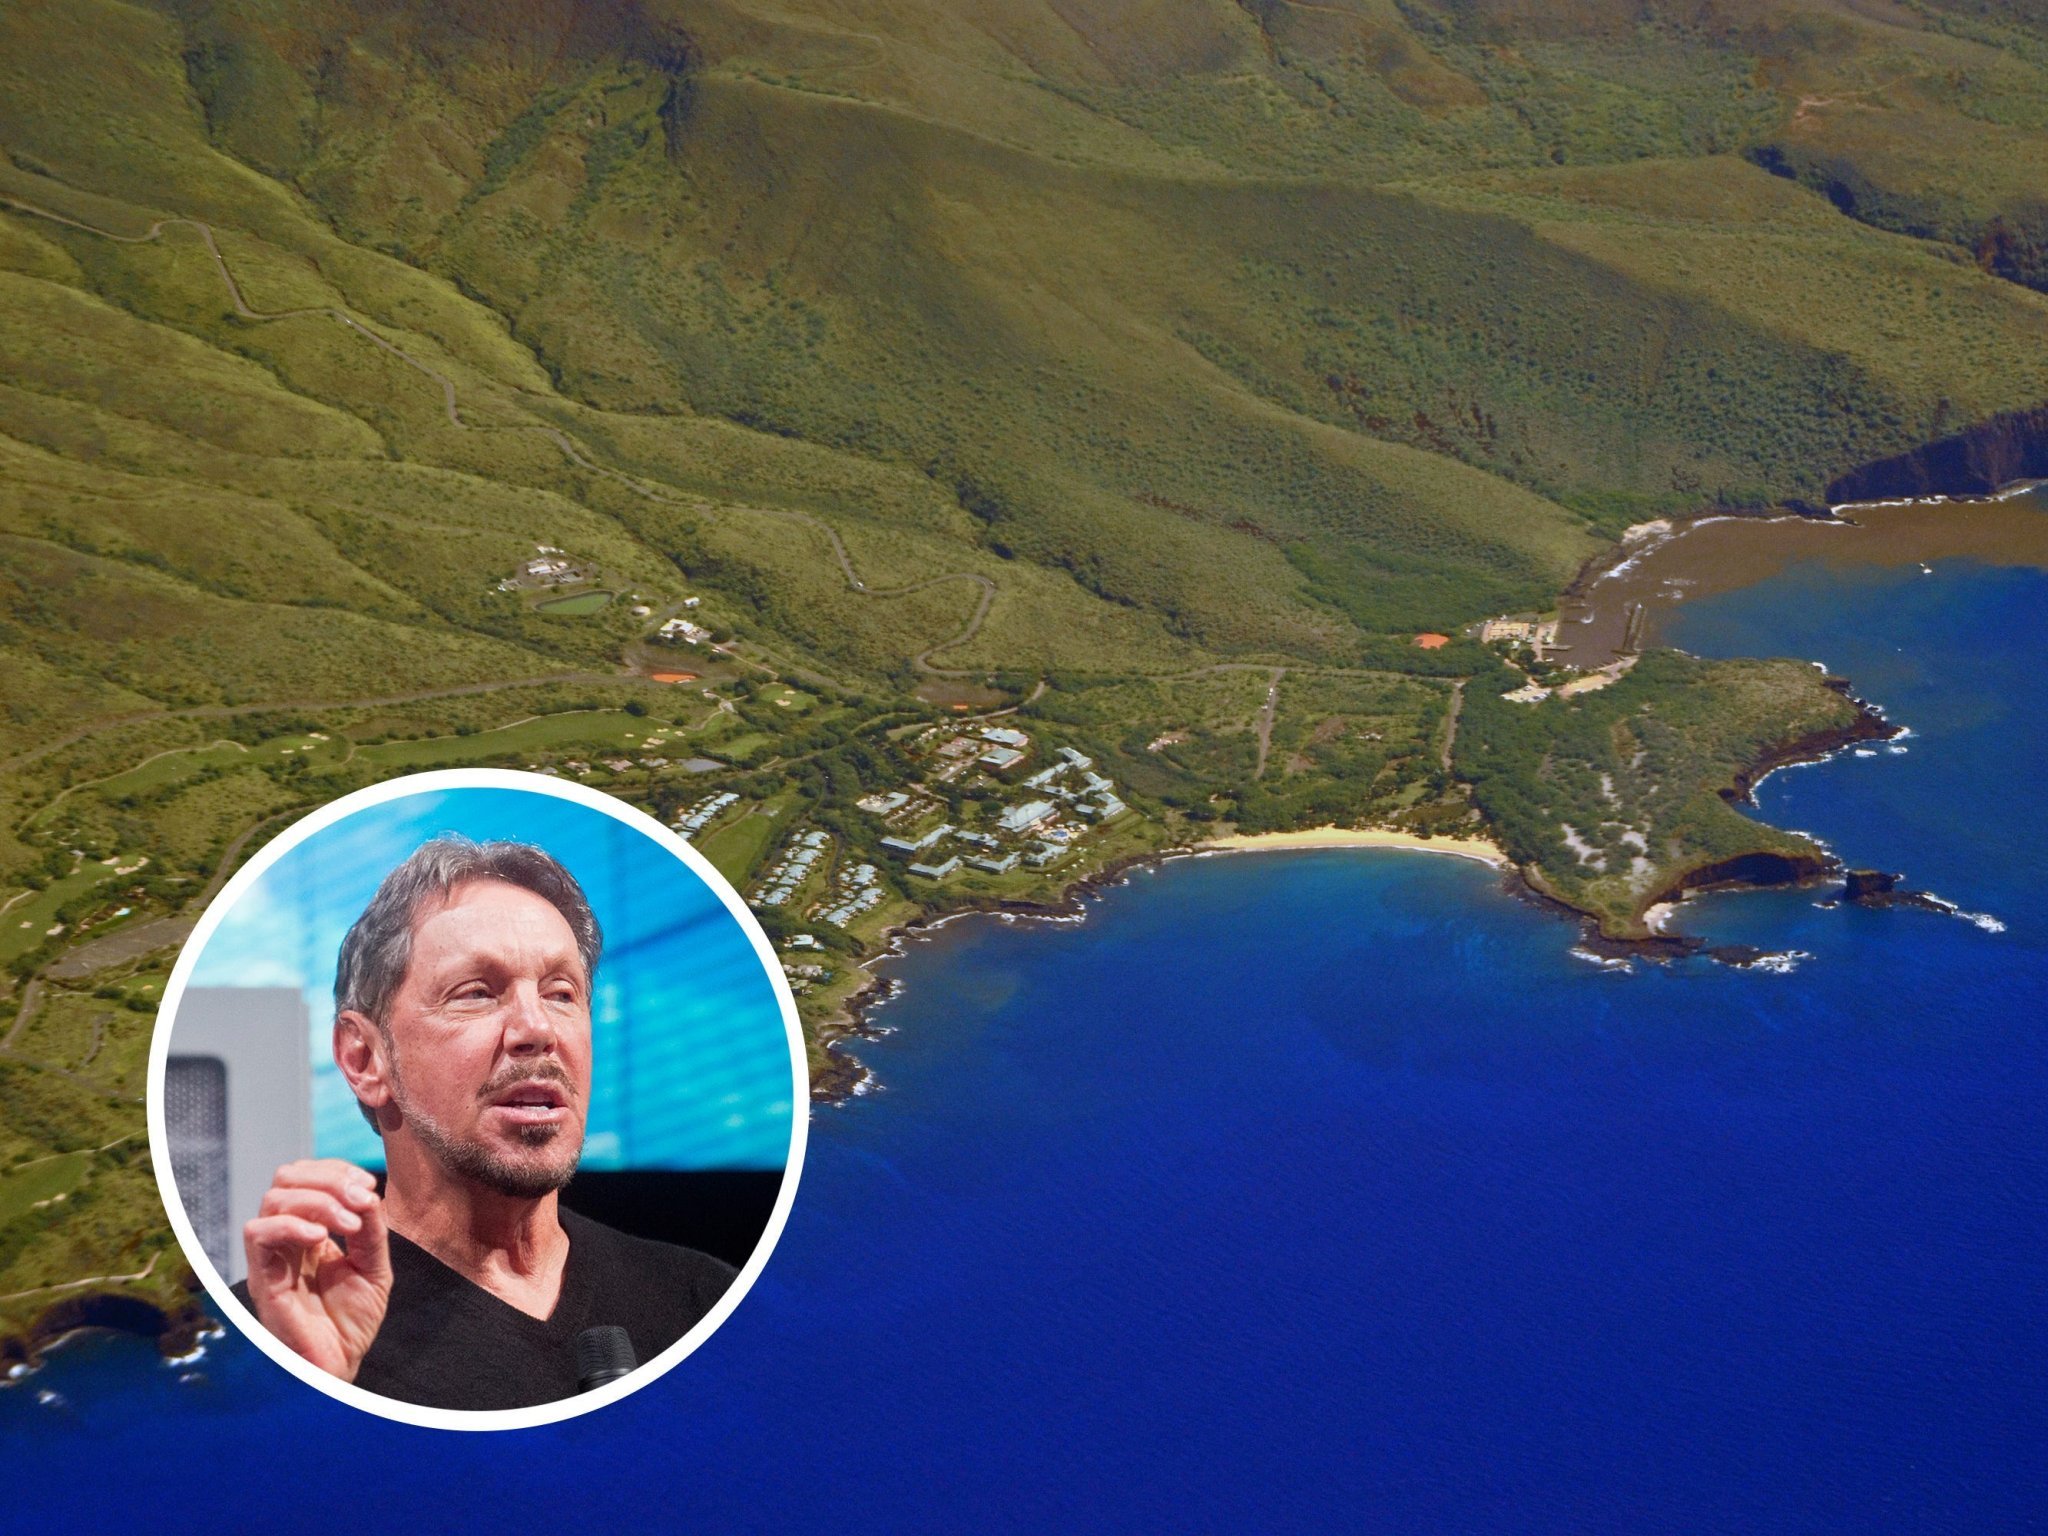 Oracle billionaire Larry Ellison now lives on Lana'i, the Hawaiian island he mostly owns. Here's how he's working to turn the island into a wellness utopia and '100% green community.'